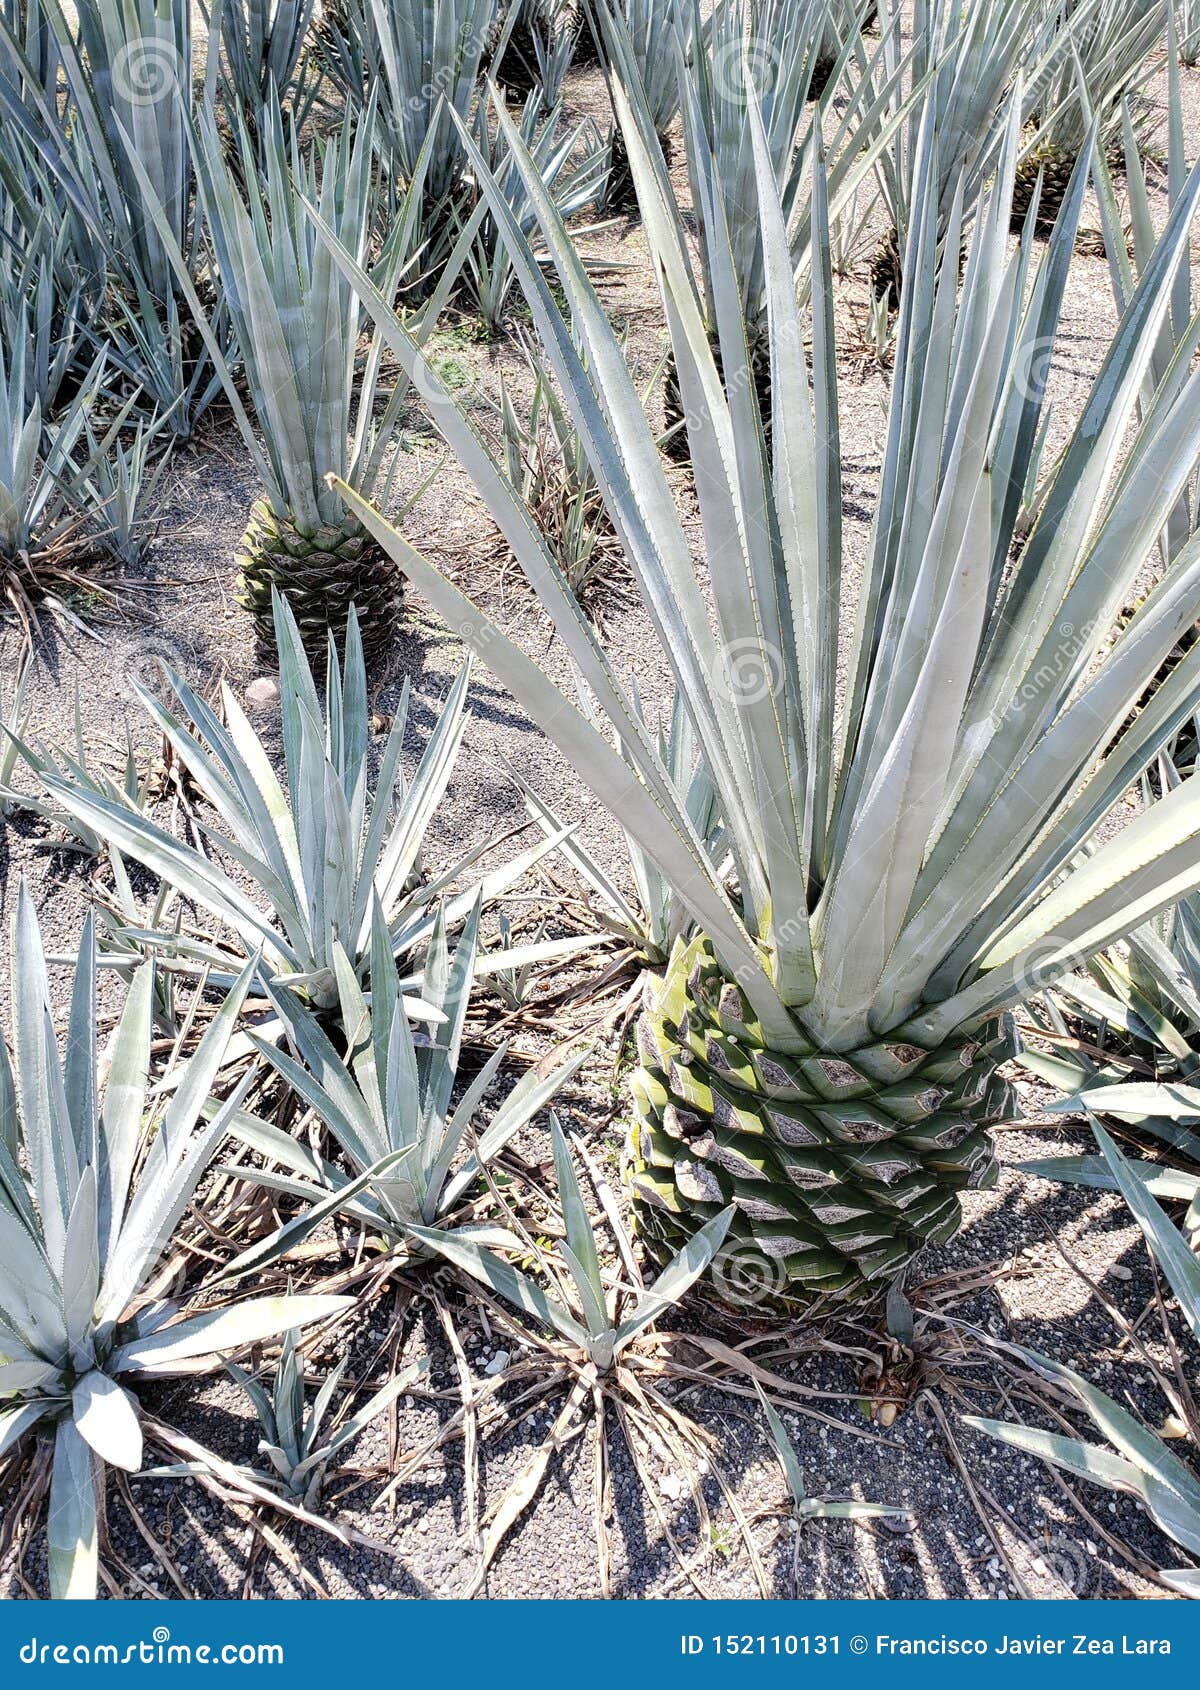 Blue Agave Plant In Growing Area For Production Of Tequila ...